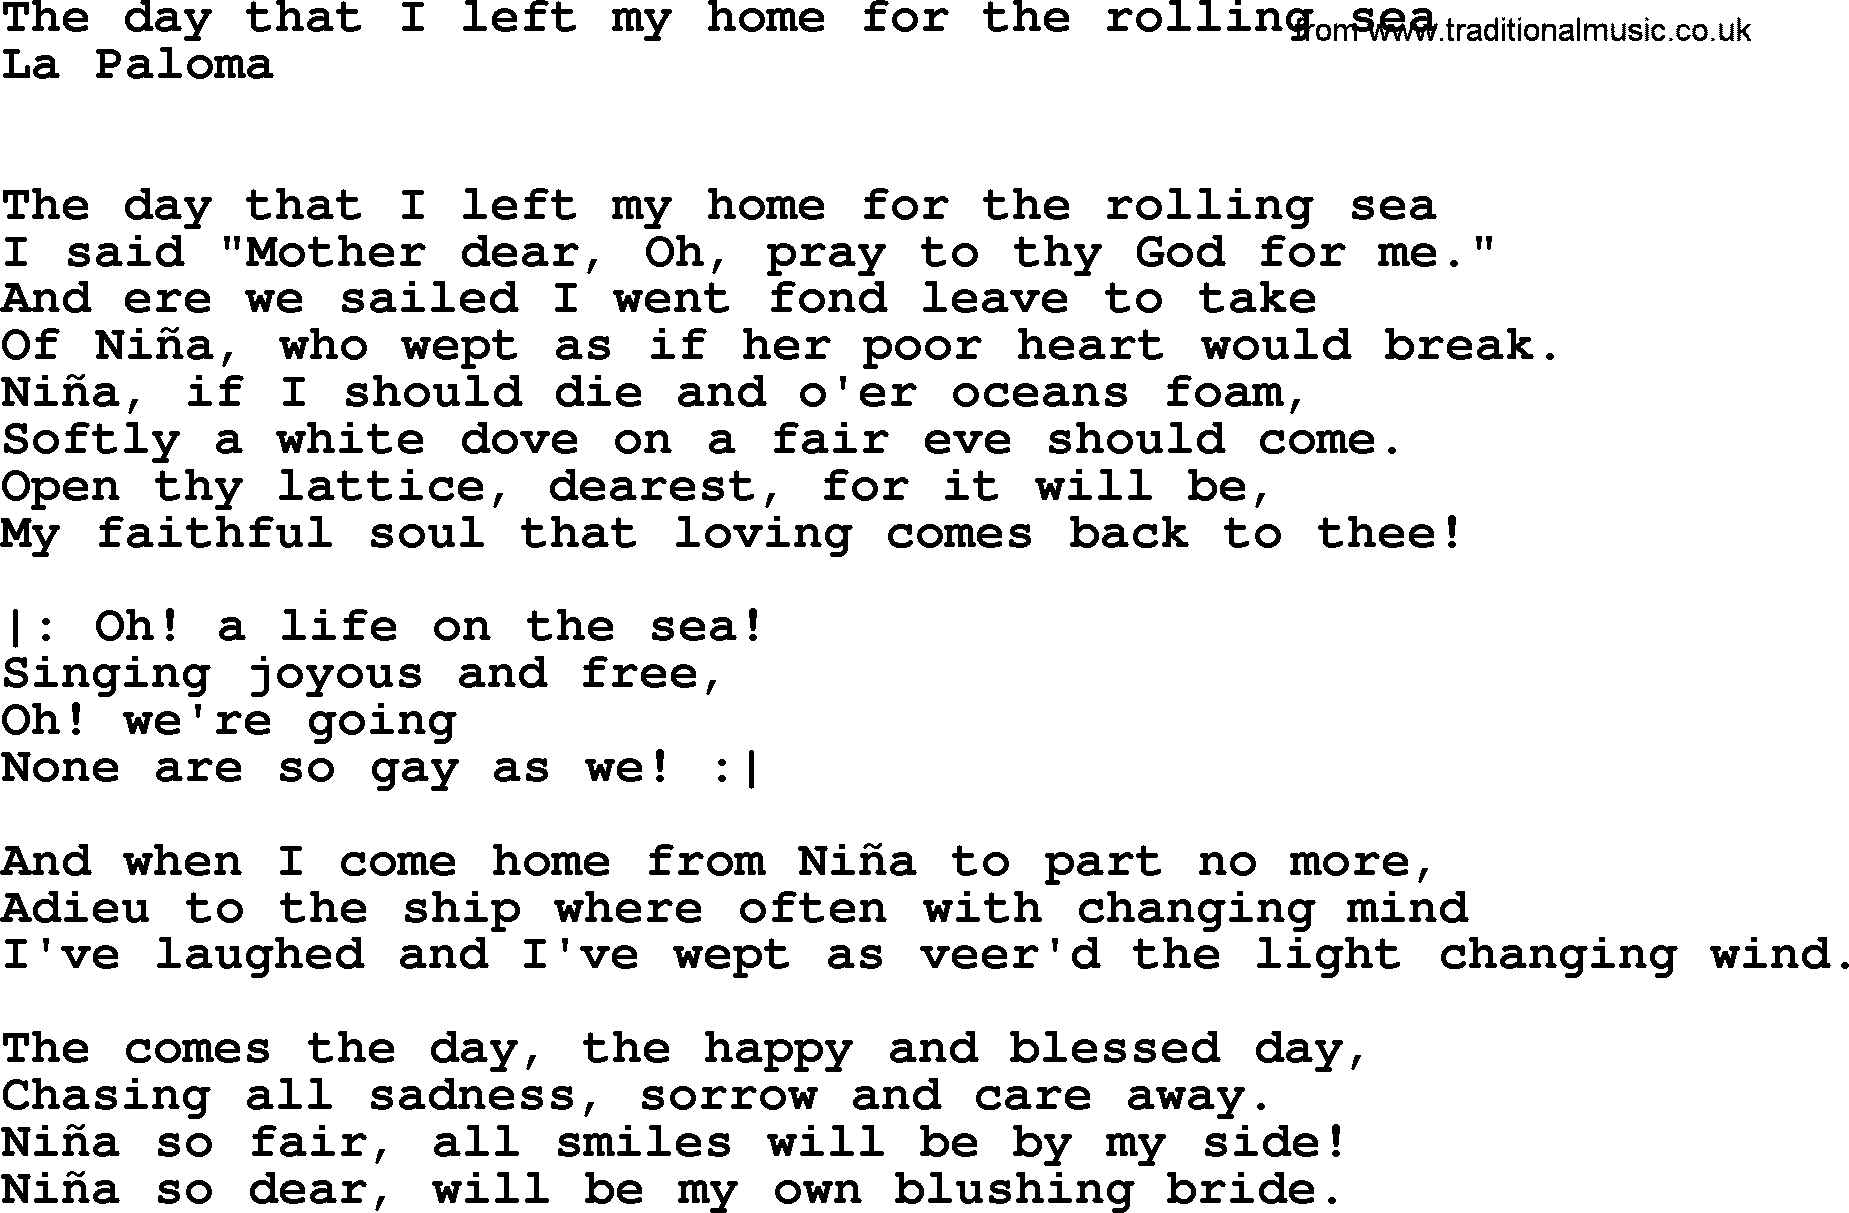 Sea Song or Shantie: The Day That I Left My Home For The Rolling Sea, lyrics